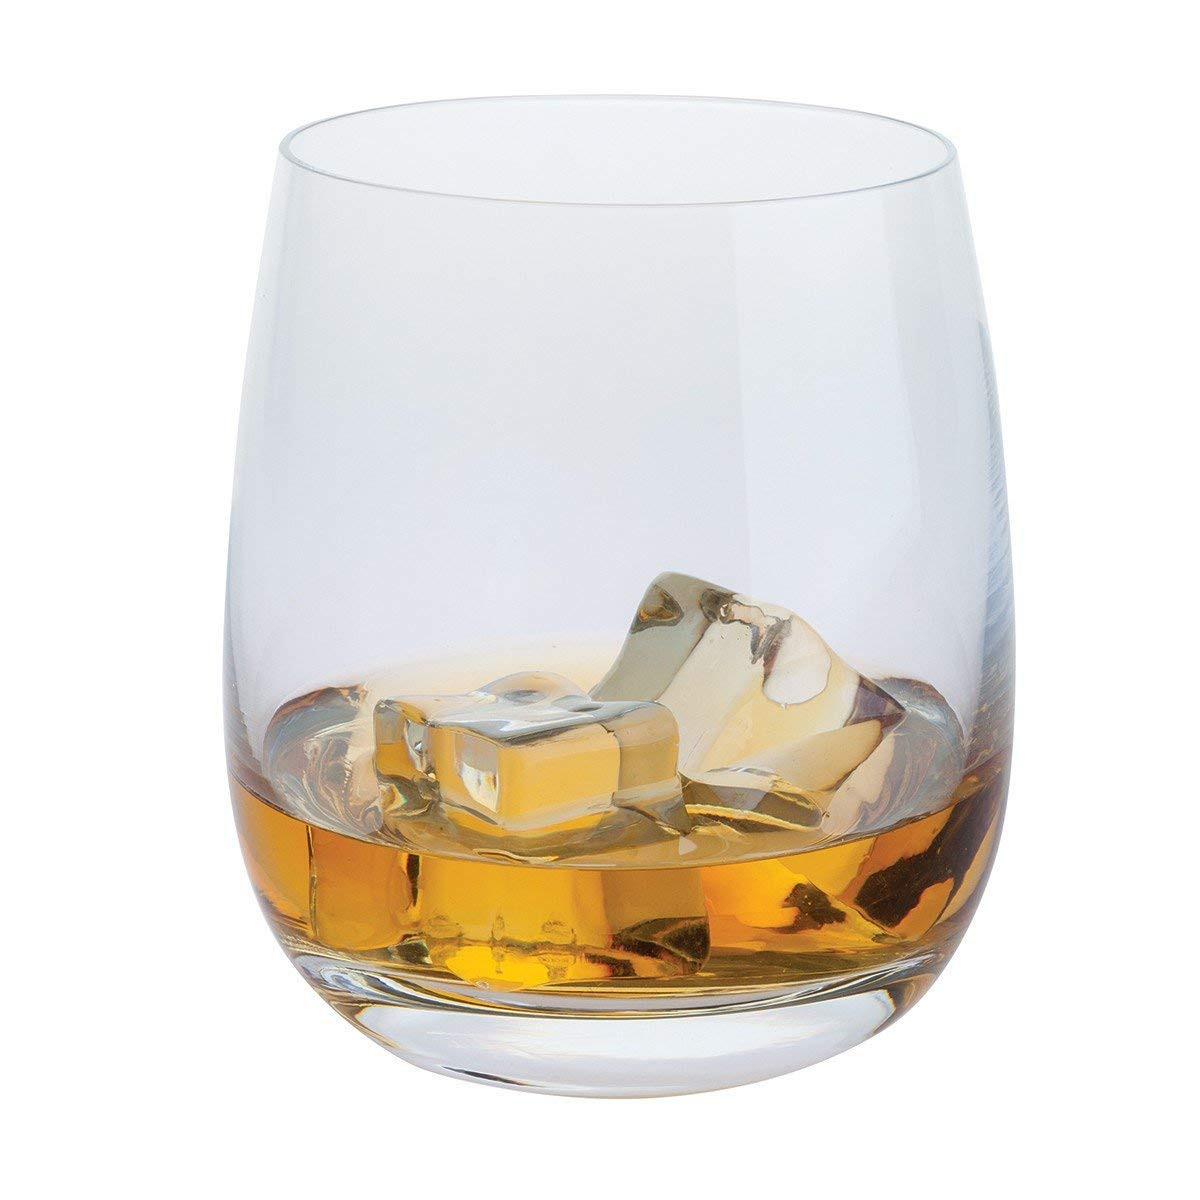 14 Stylish Rcr Crystal Vase 2024 free download rcr crystal vase of dartington crystal triple tipple tumbler brandy highball drinking regarding explore and appreciate the world of fine spirits with this great three glass selection